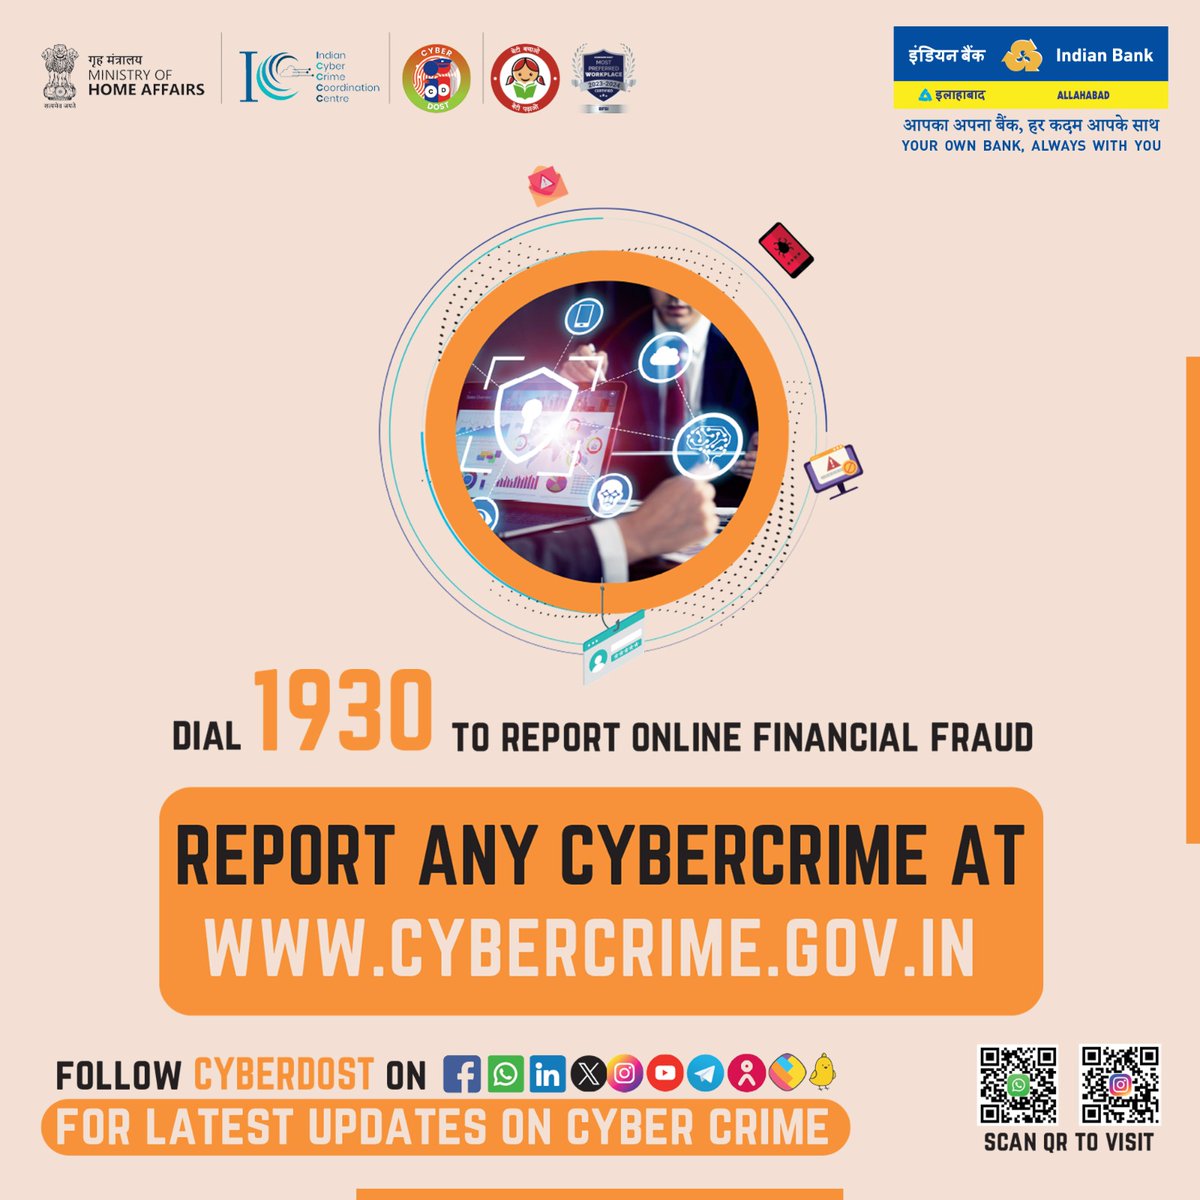 Reporting online financial fraud is essential in preventing it from happening again. Call 1930 to report instances of online financial fraud. Let's work together to combat cybercrime! #IndianBank @DFS_India @Cyberdost